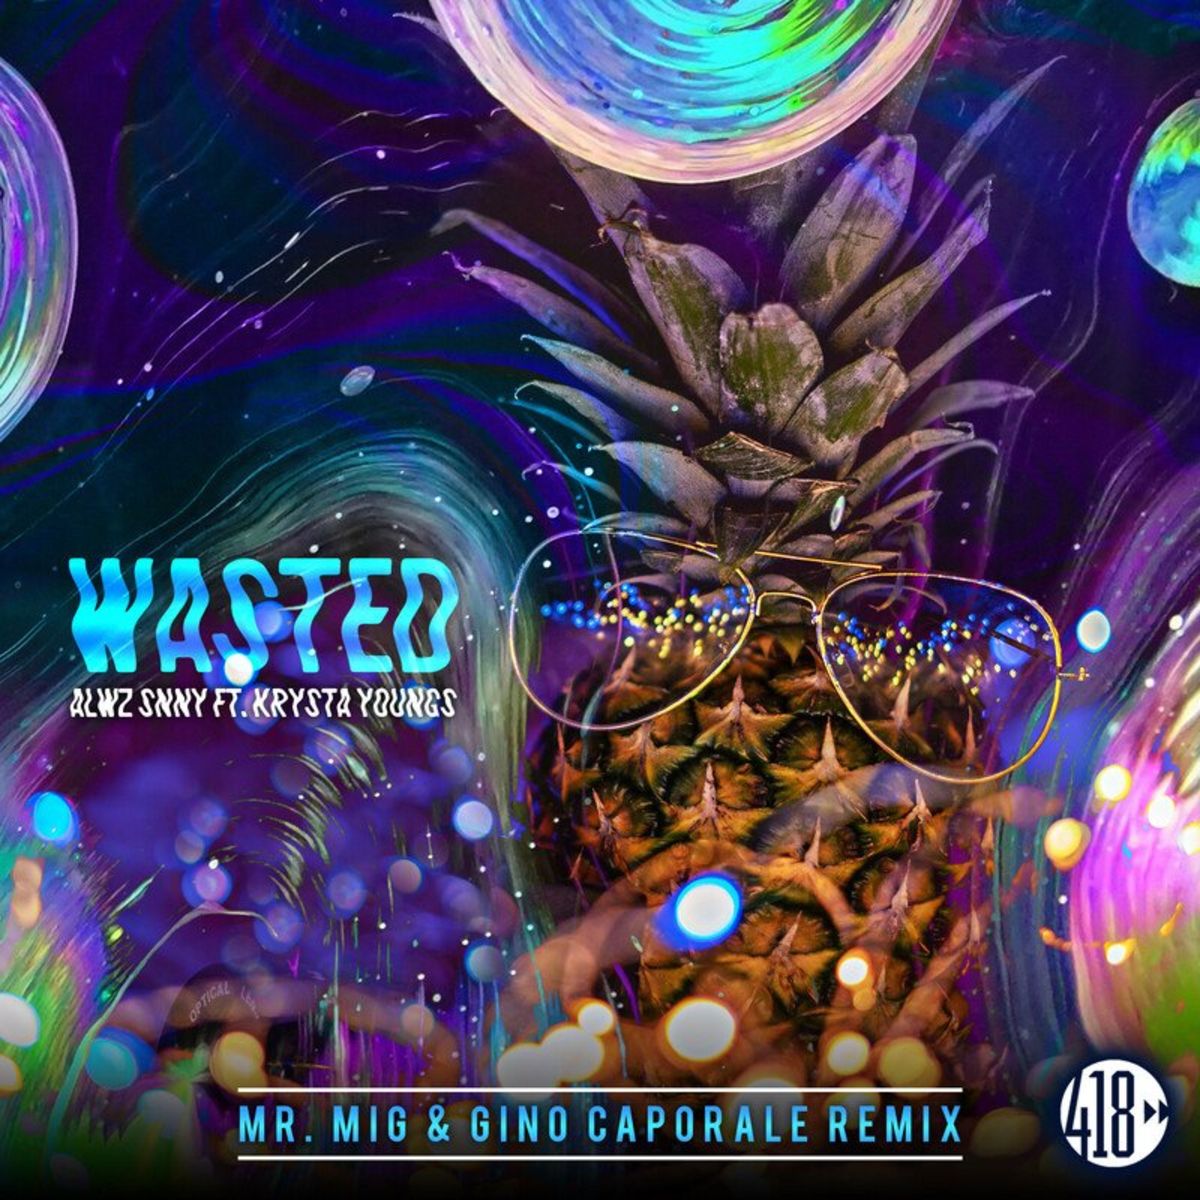 Alwz Snny ft Krysta Youngs - Wasted (Mr. Mig & Gino Caporale)